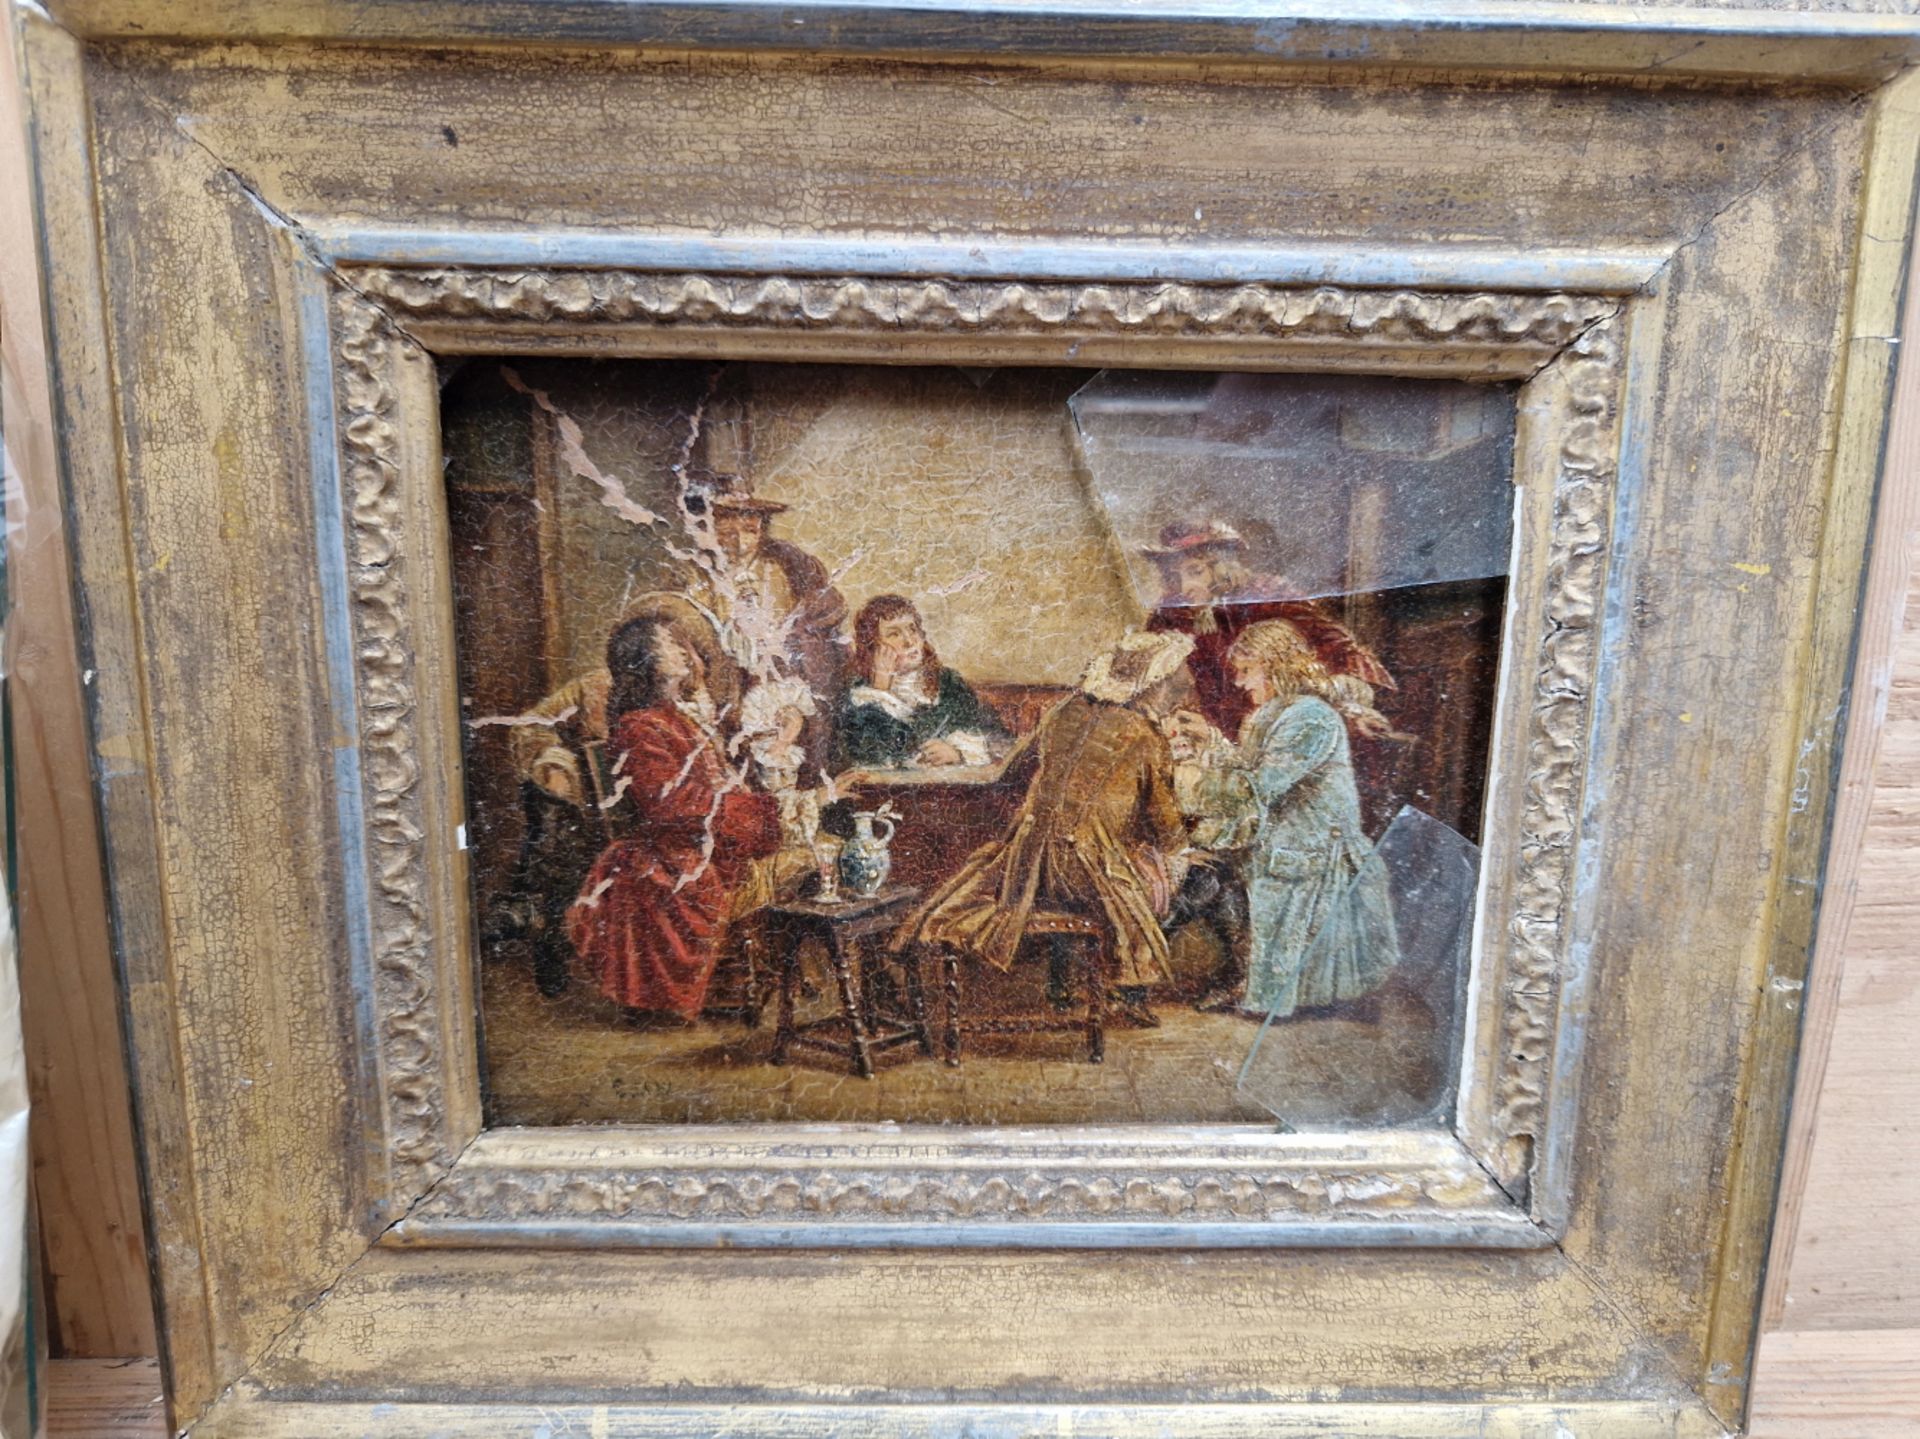 A PAIR OF GILT ROCOCO STYLE FRAMES TOGETHER WITH A GILT FRAMED PICTURE OF FIGURES IN A TAVERN. (3)